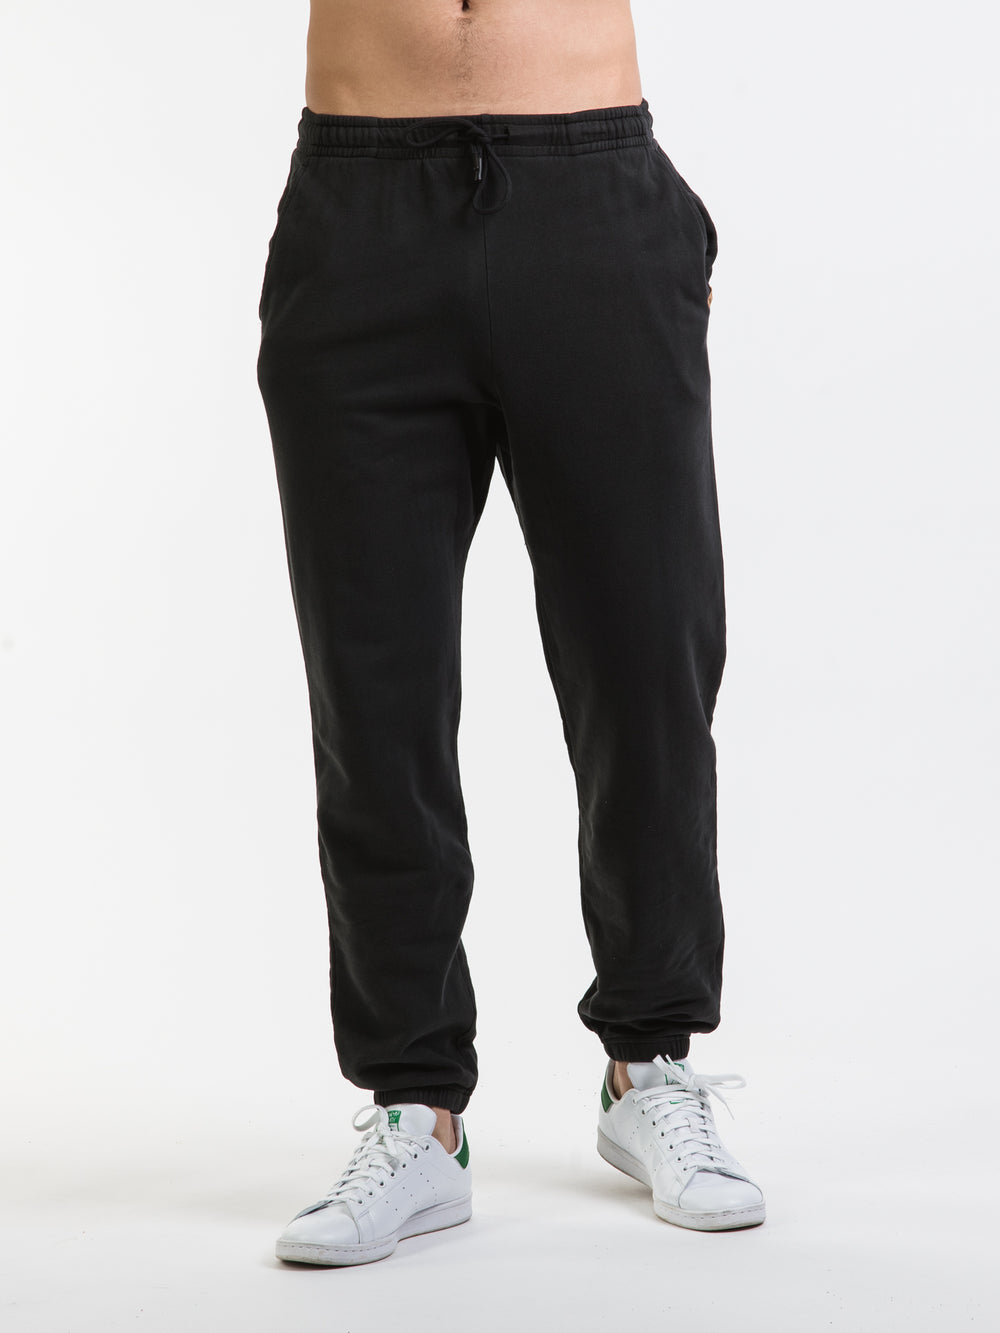 TENTREE ORGANIC FRENCH TERRY SWEAT PANTS - CLEARANCE